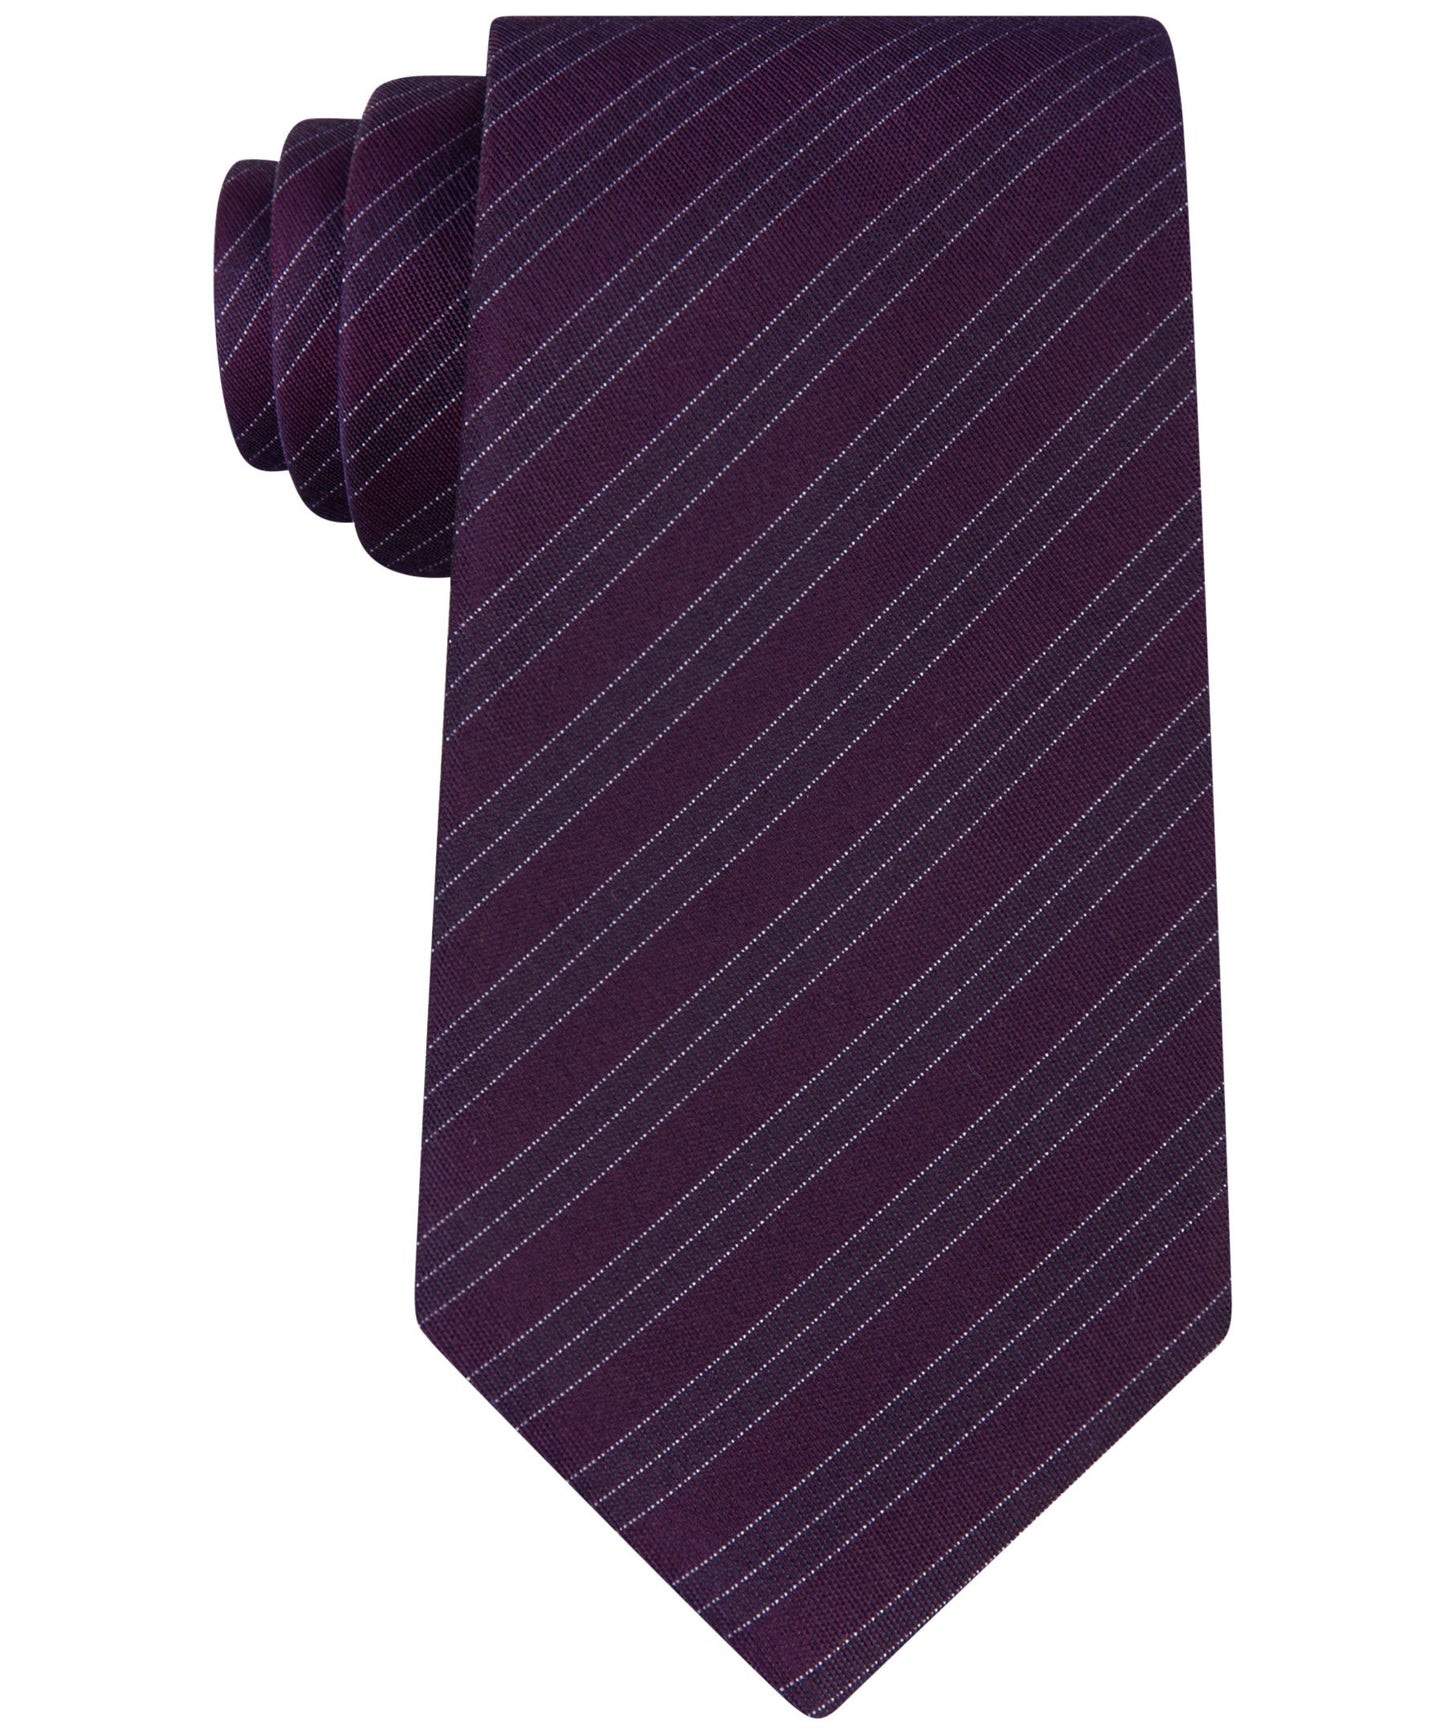 Kenneth Cole REACTION Double Veloutine Stripe Tie Burgundy